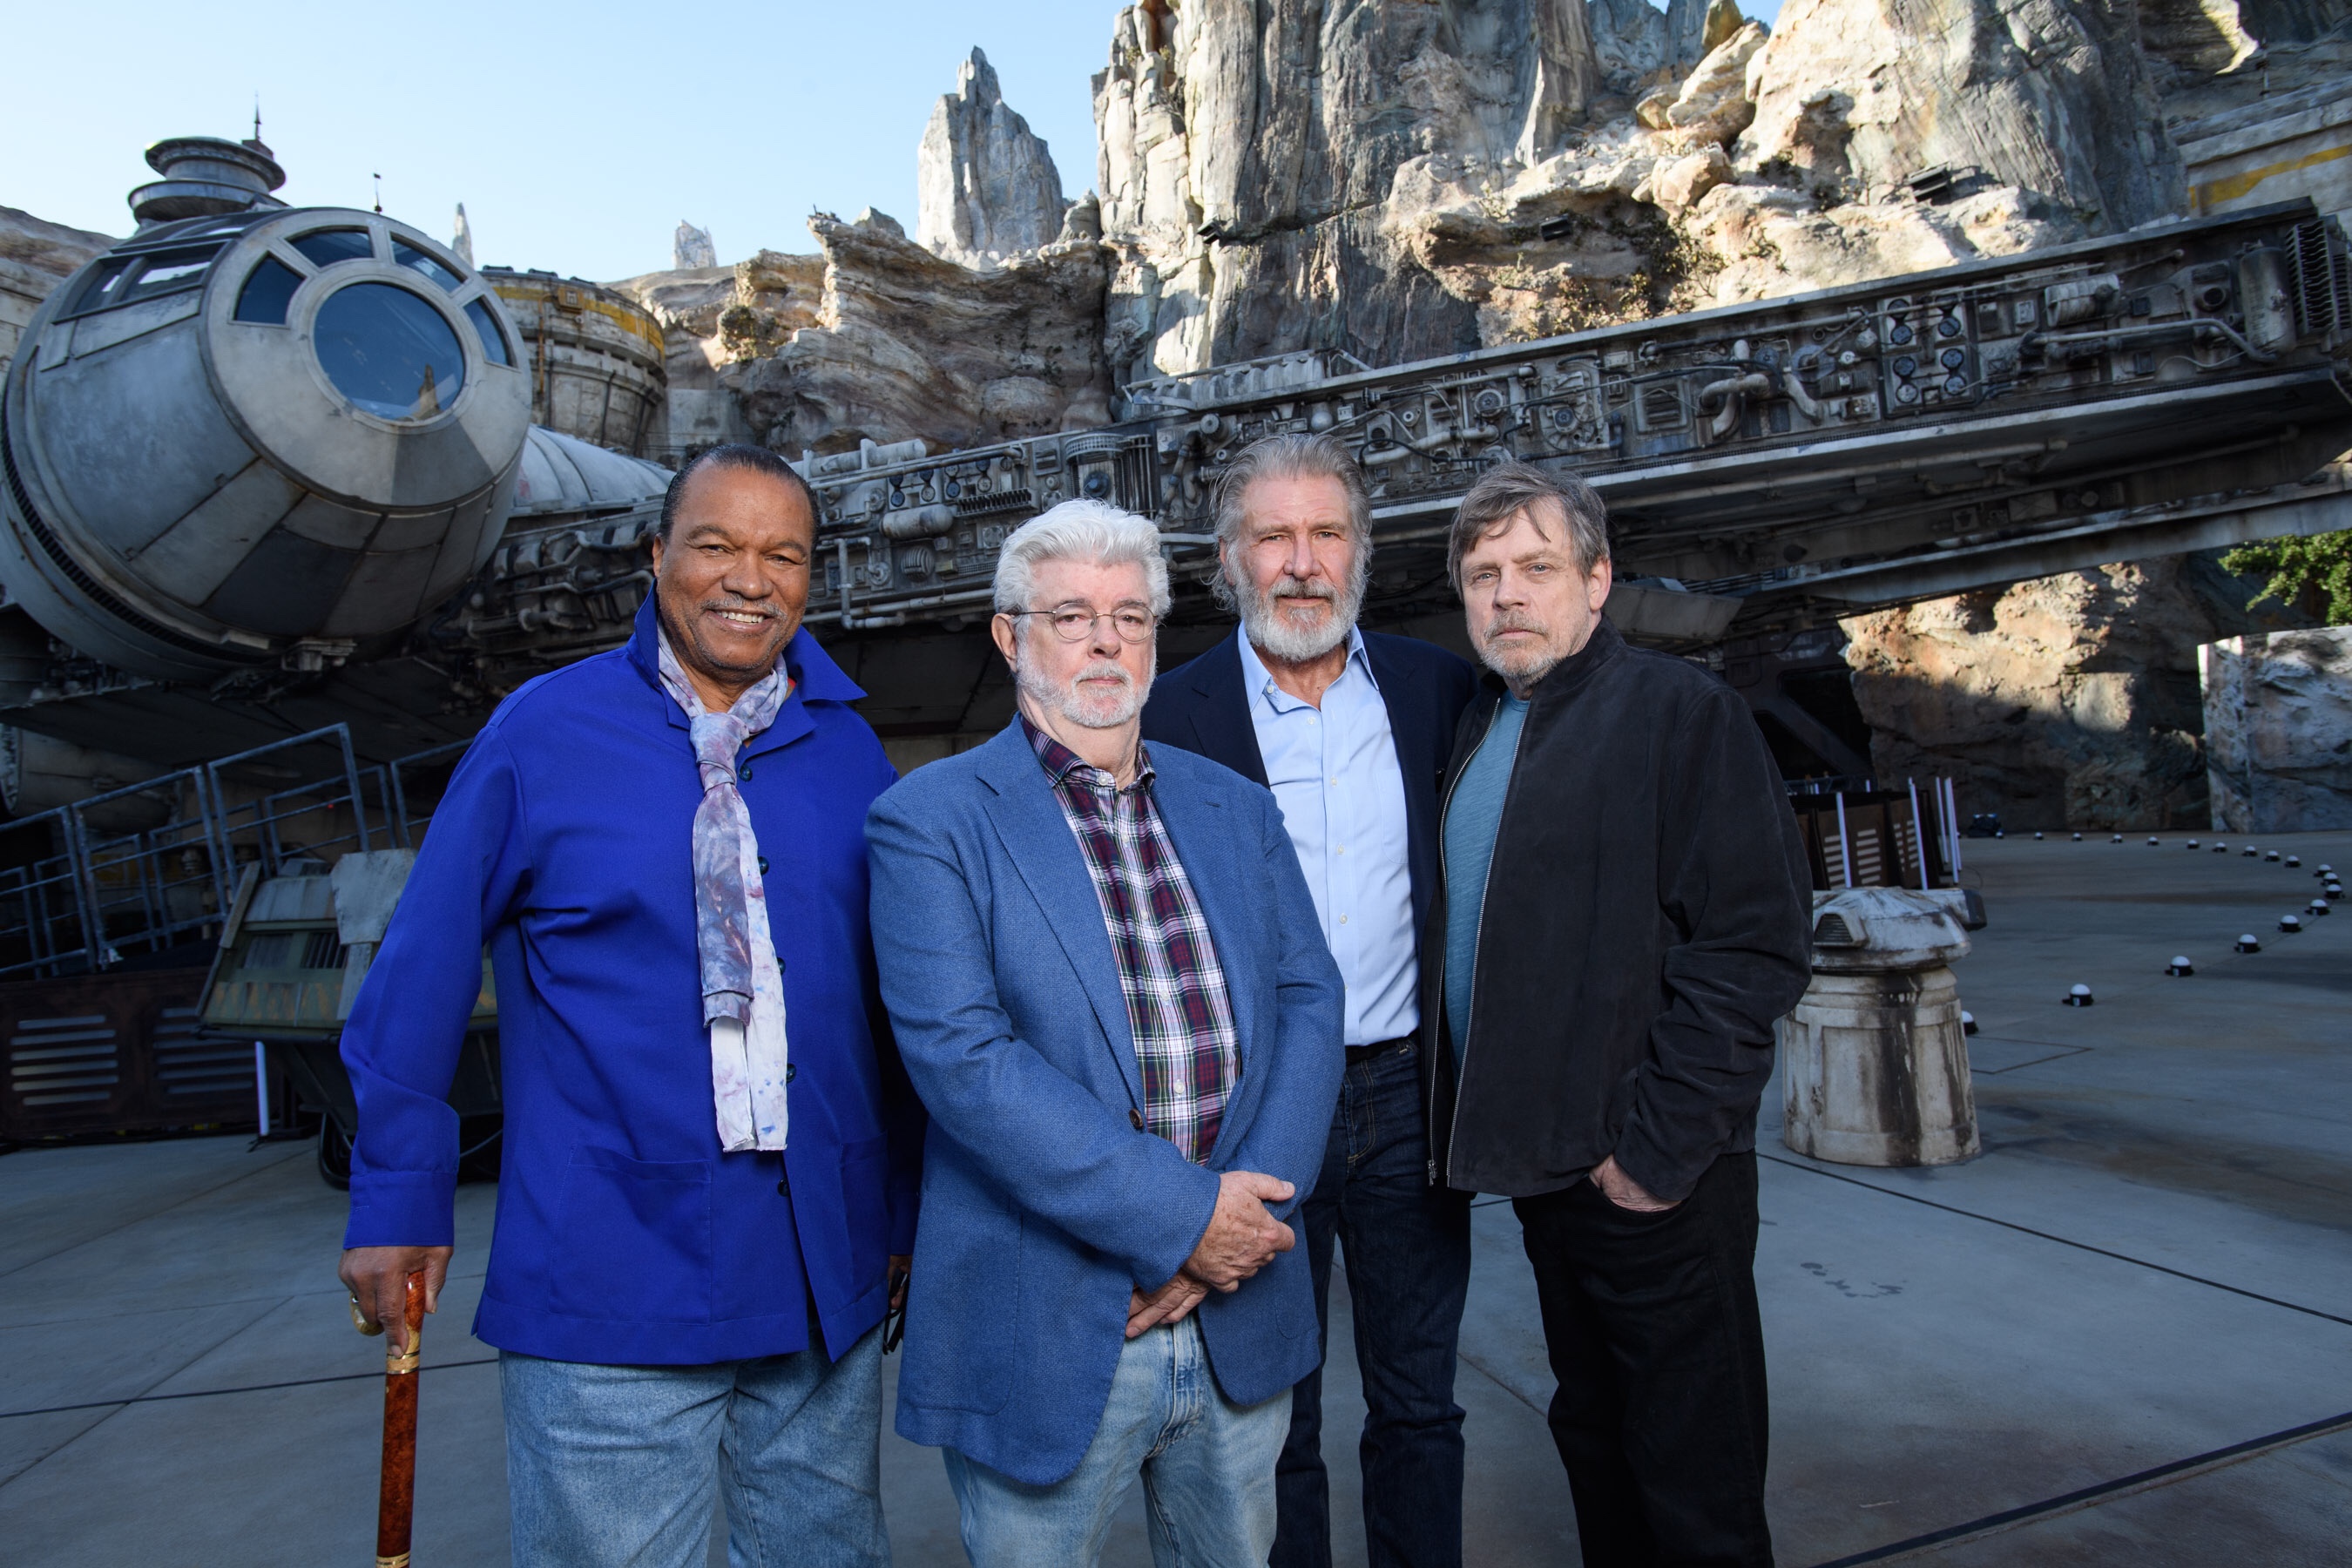 History Was Made as George Lucas, Bob Iger, Harrison Ford, Mark Hamill, and Billy Dee Williams Open Star Wars Galaxy’s Edge